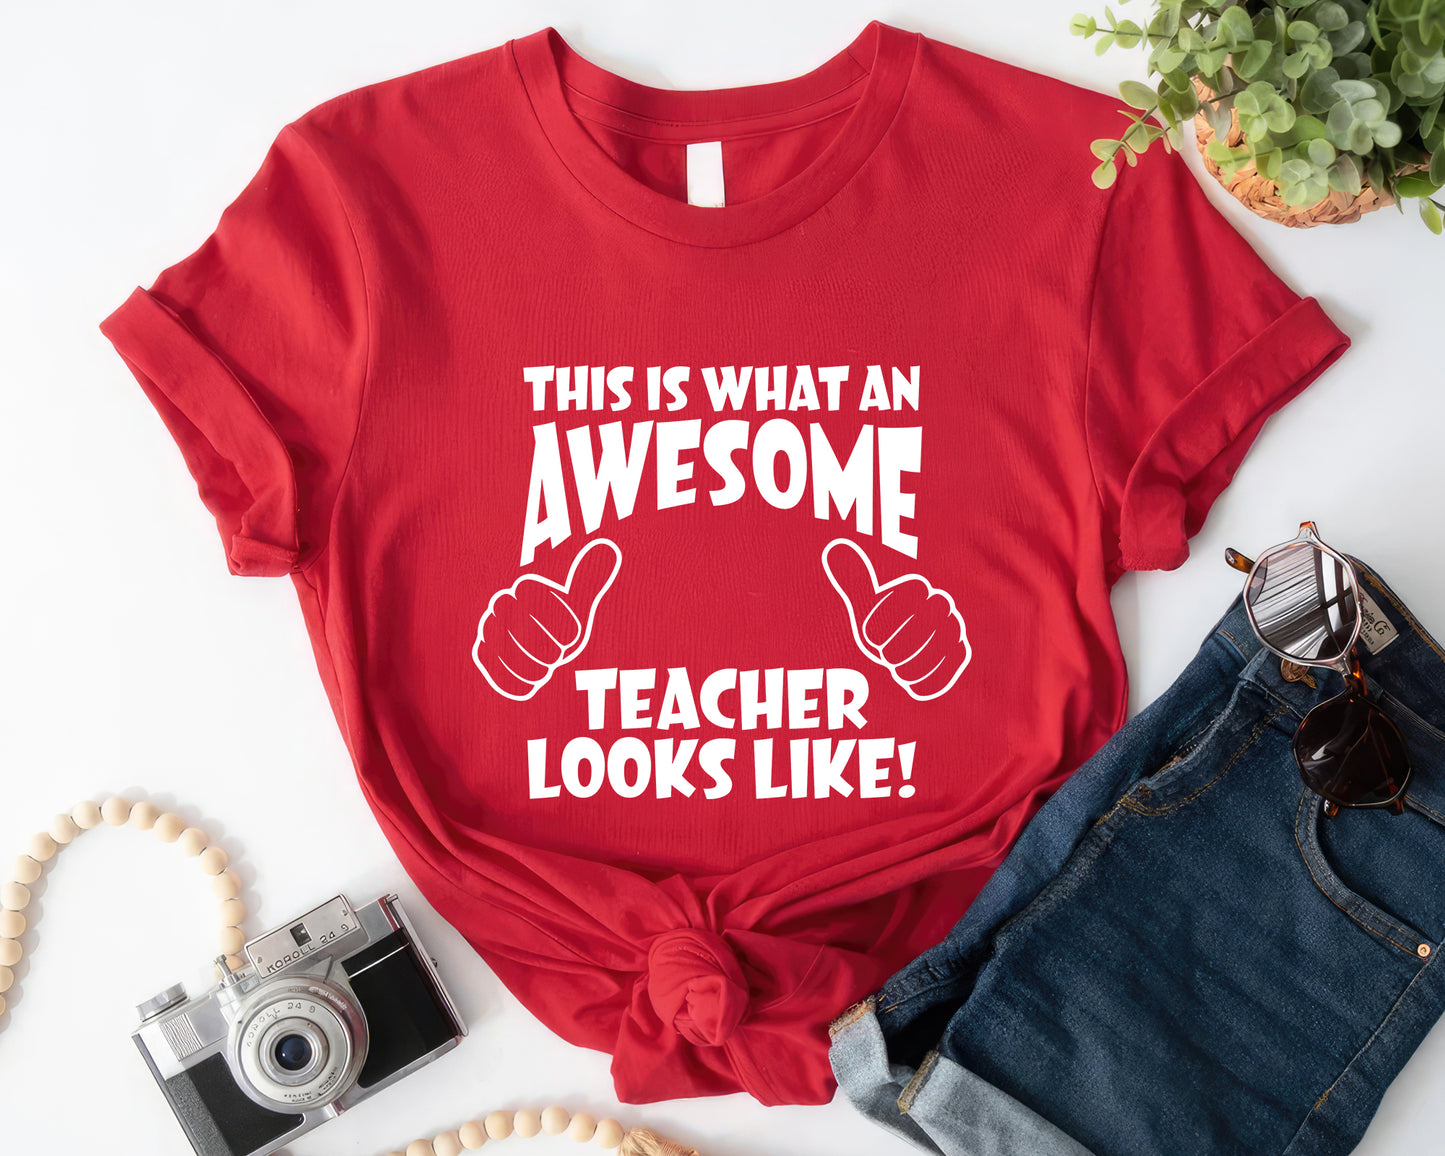 This Is An Awesome Teacher Looks Like Personalized Tee | Back To School Customized T-shirts | Funny Quote Teacher T-shirt - Red